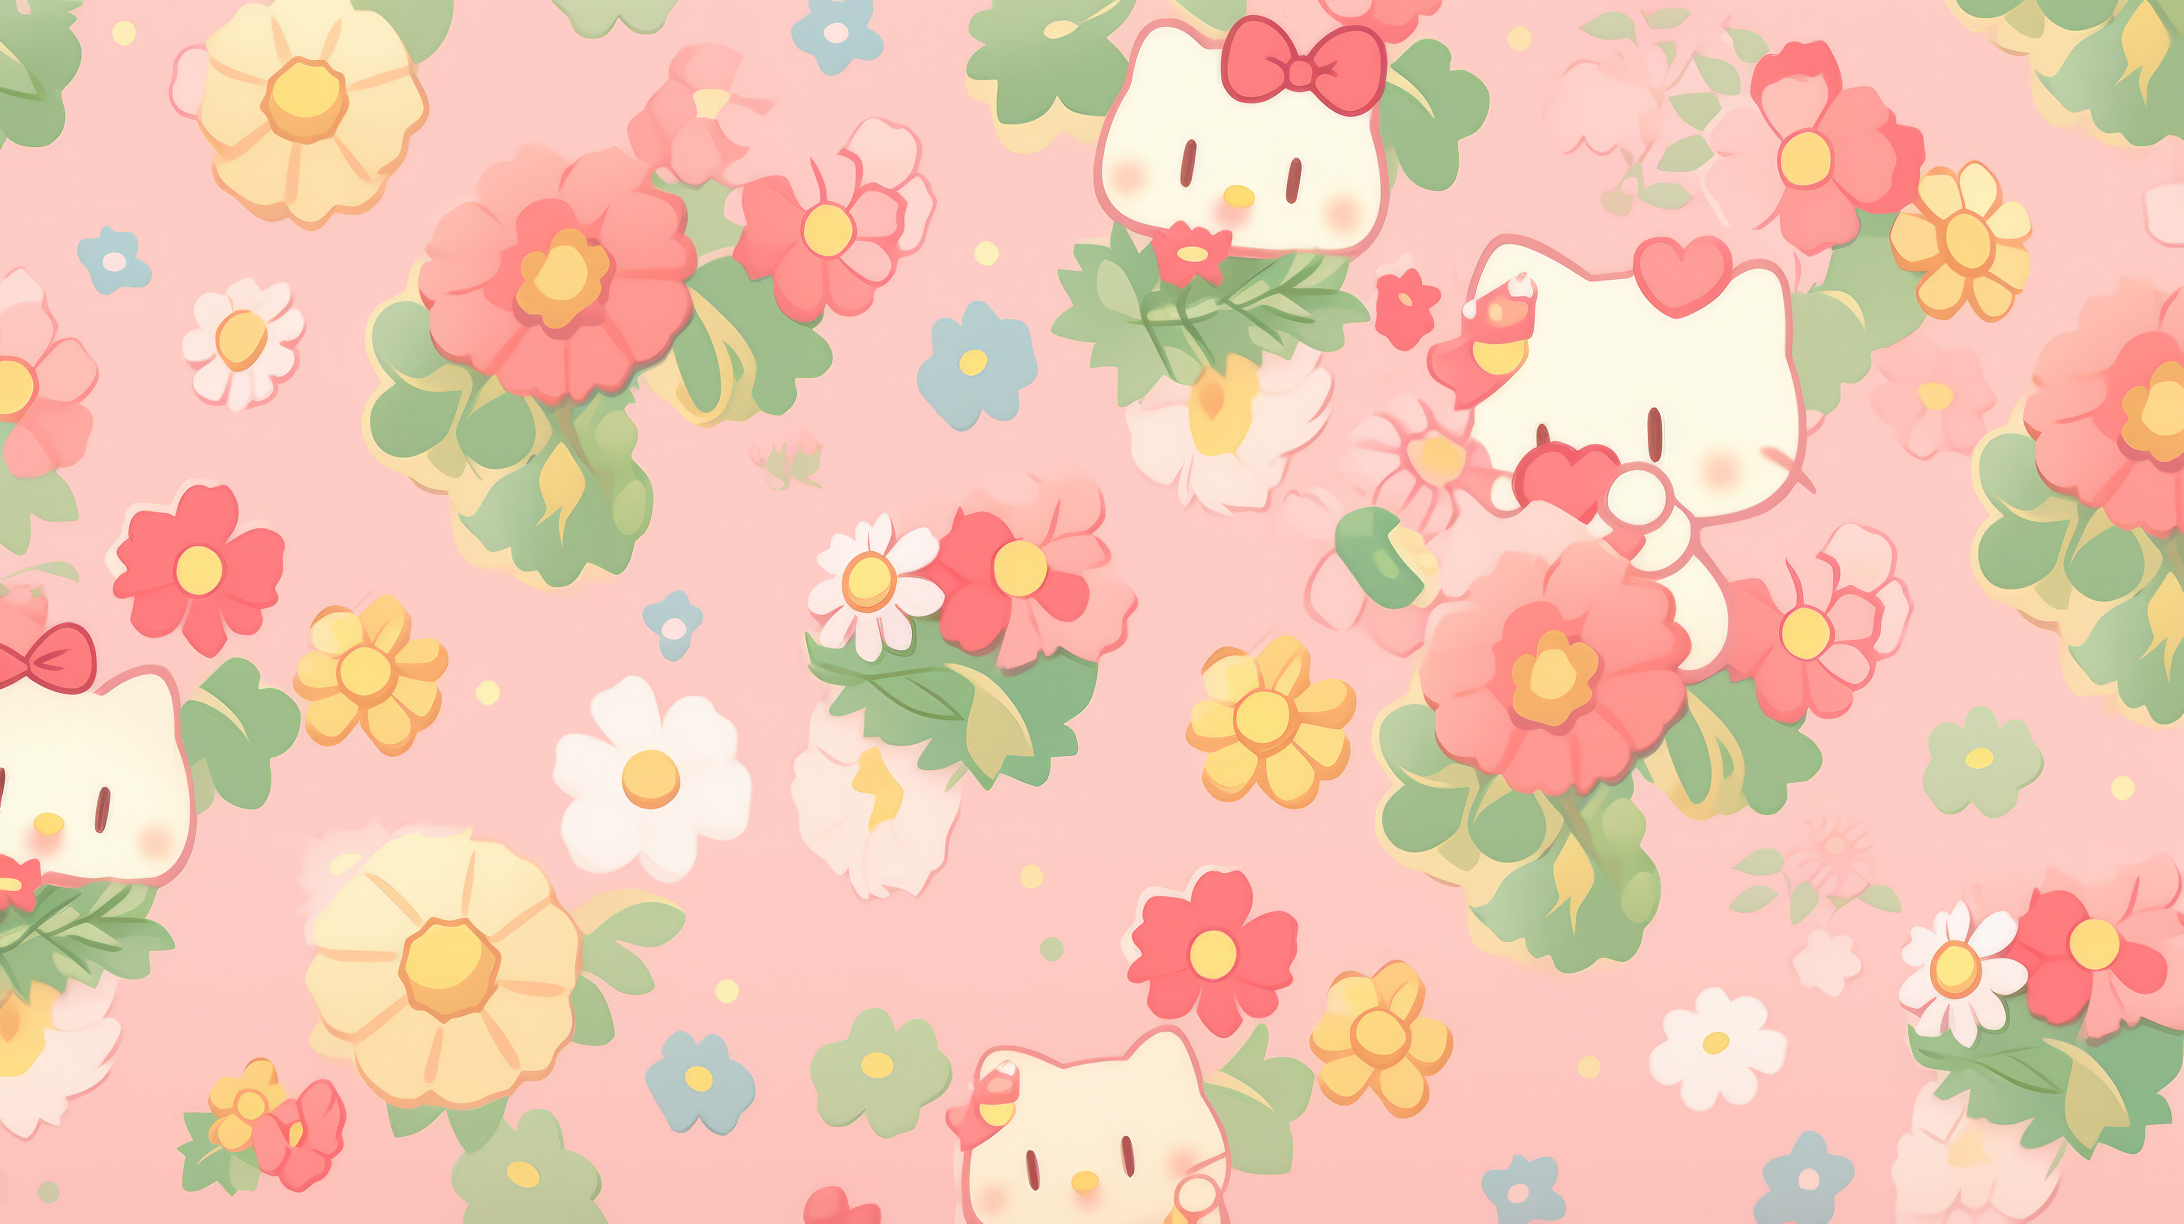 HD desktop wallpaper featuring a cute Hello Kitty pattern with colorful flowers on a pink background, suitable for a cheerful and playful screen background.